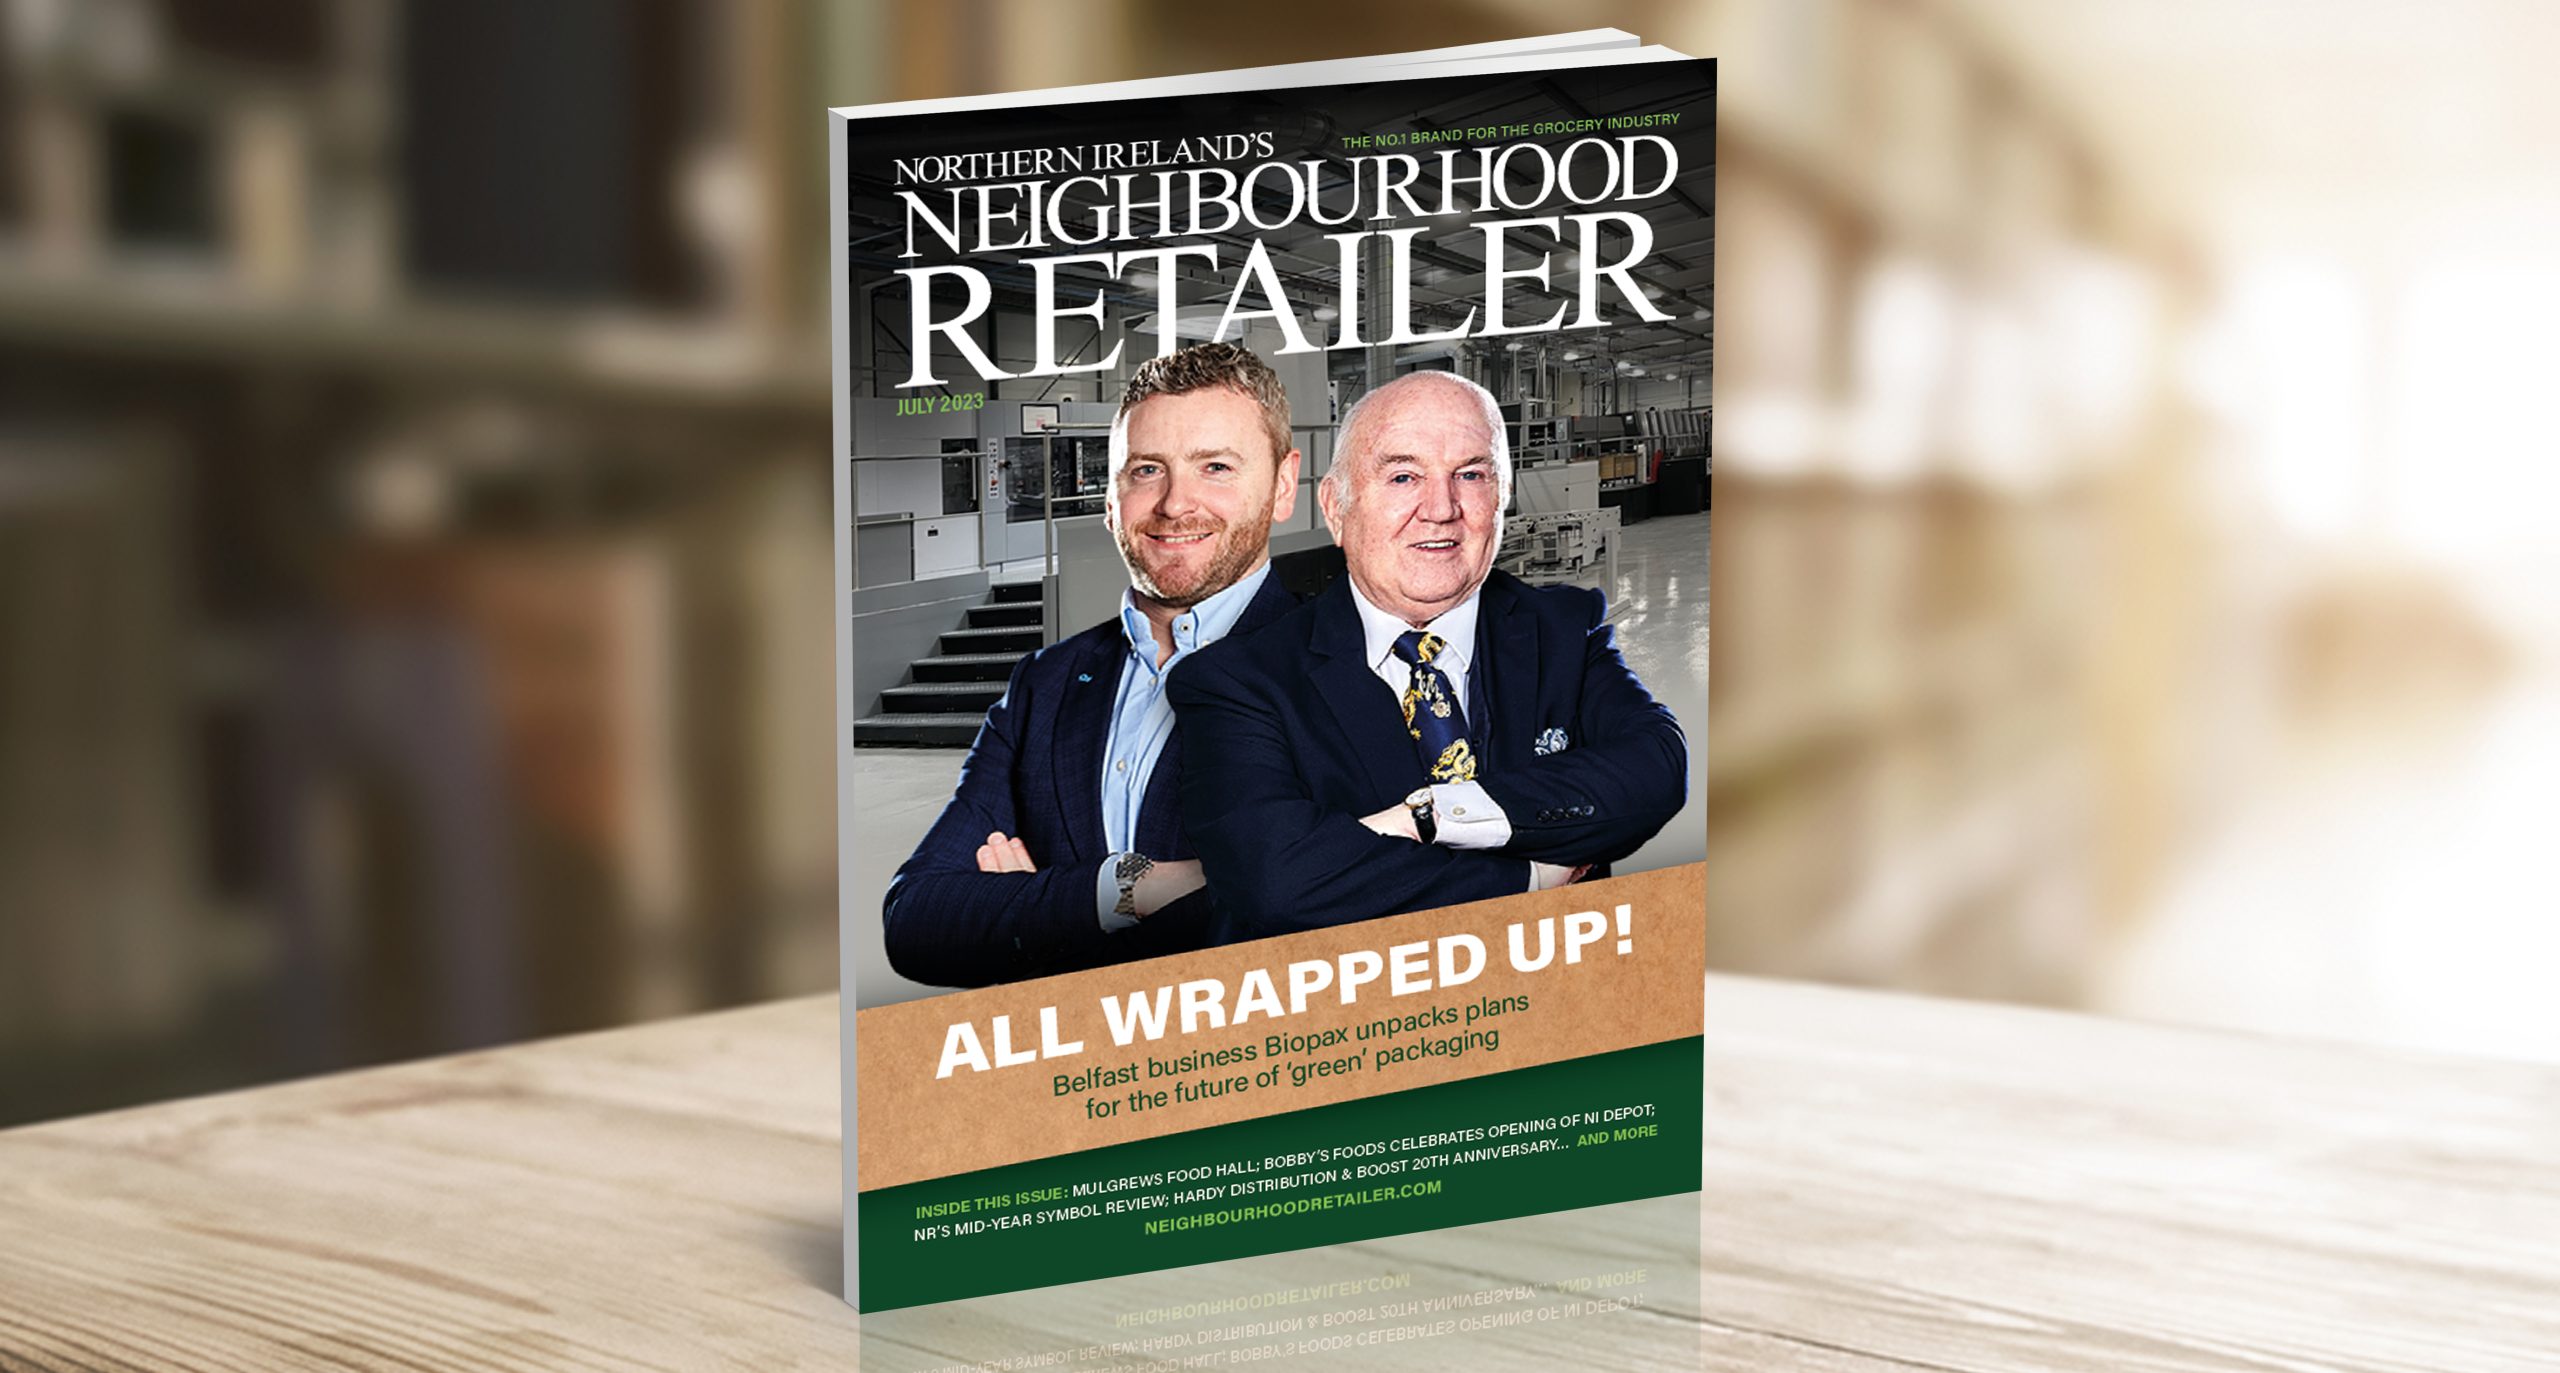 The latest issue of Neighbourhood Retailer is live!